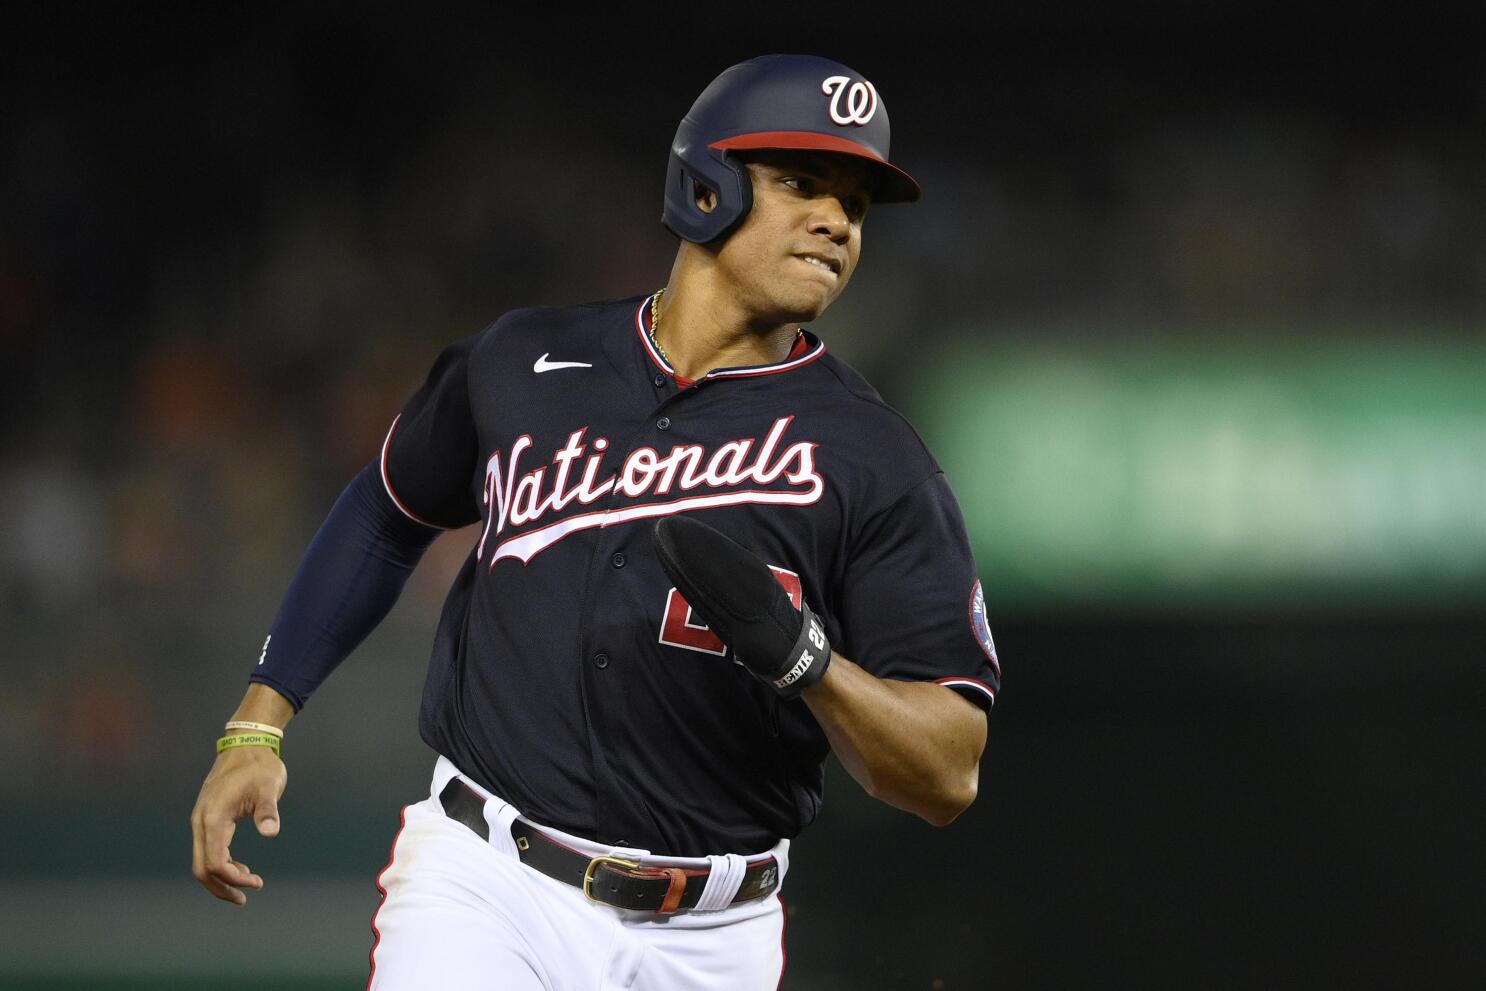 Juan Soto's present, future mean most in 2022 for Nationals